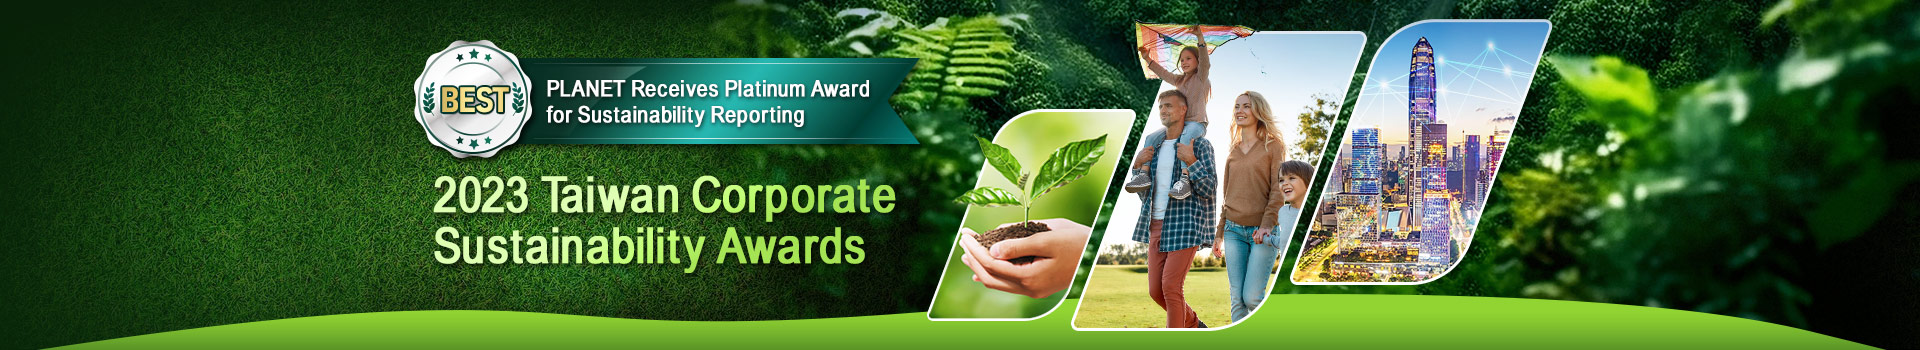 PLANET Receives Platinum Award for Sustainability Reporting at 2023 Taiwan Corporate Sustainability Awards